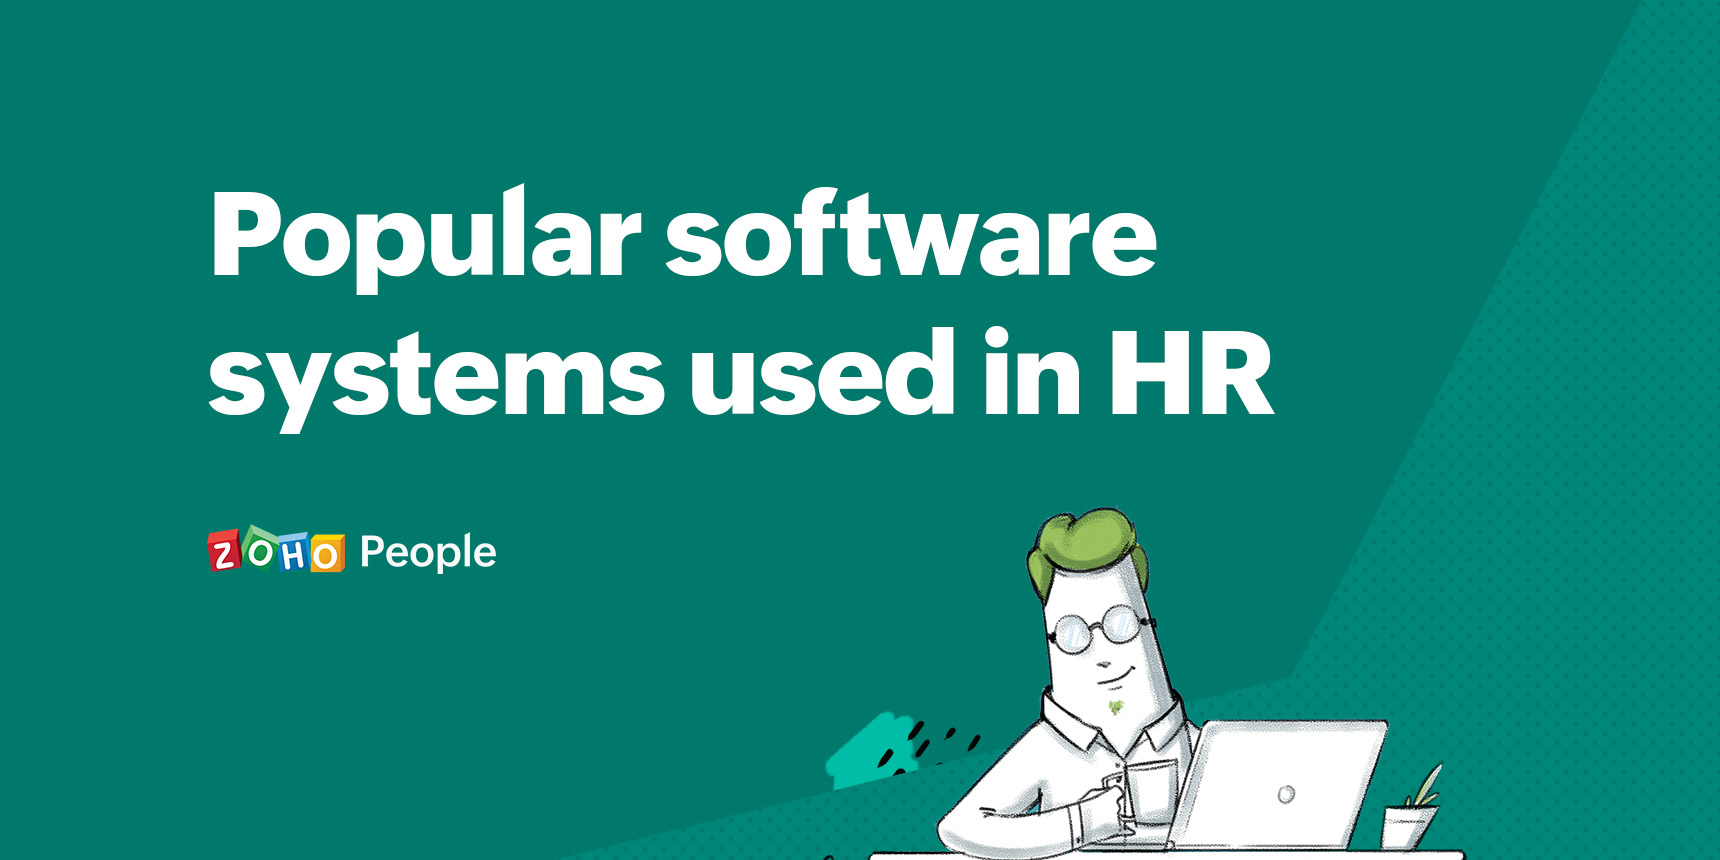 What software do HR professionals use?